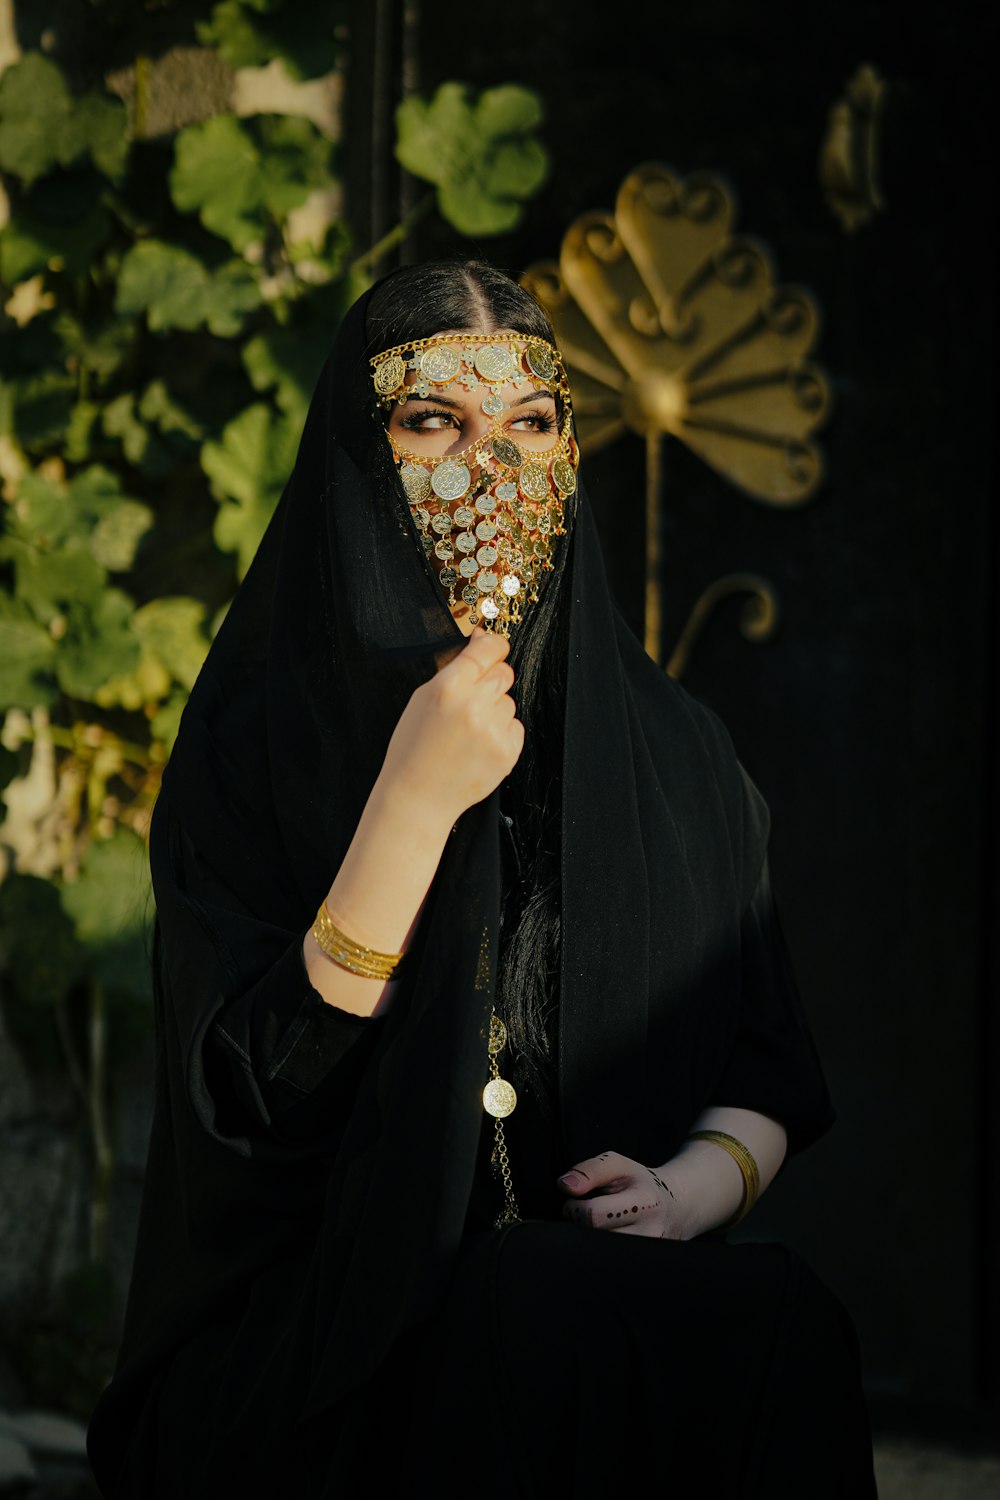 a woman wearing a black veil and gold jewelry